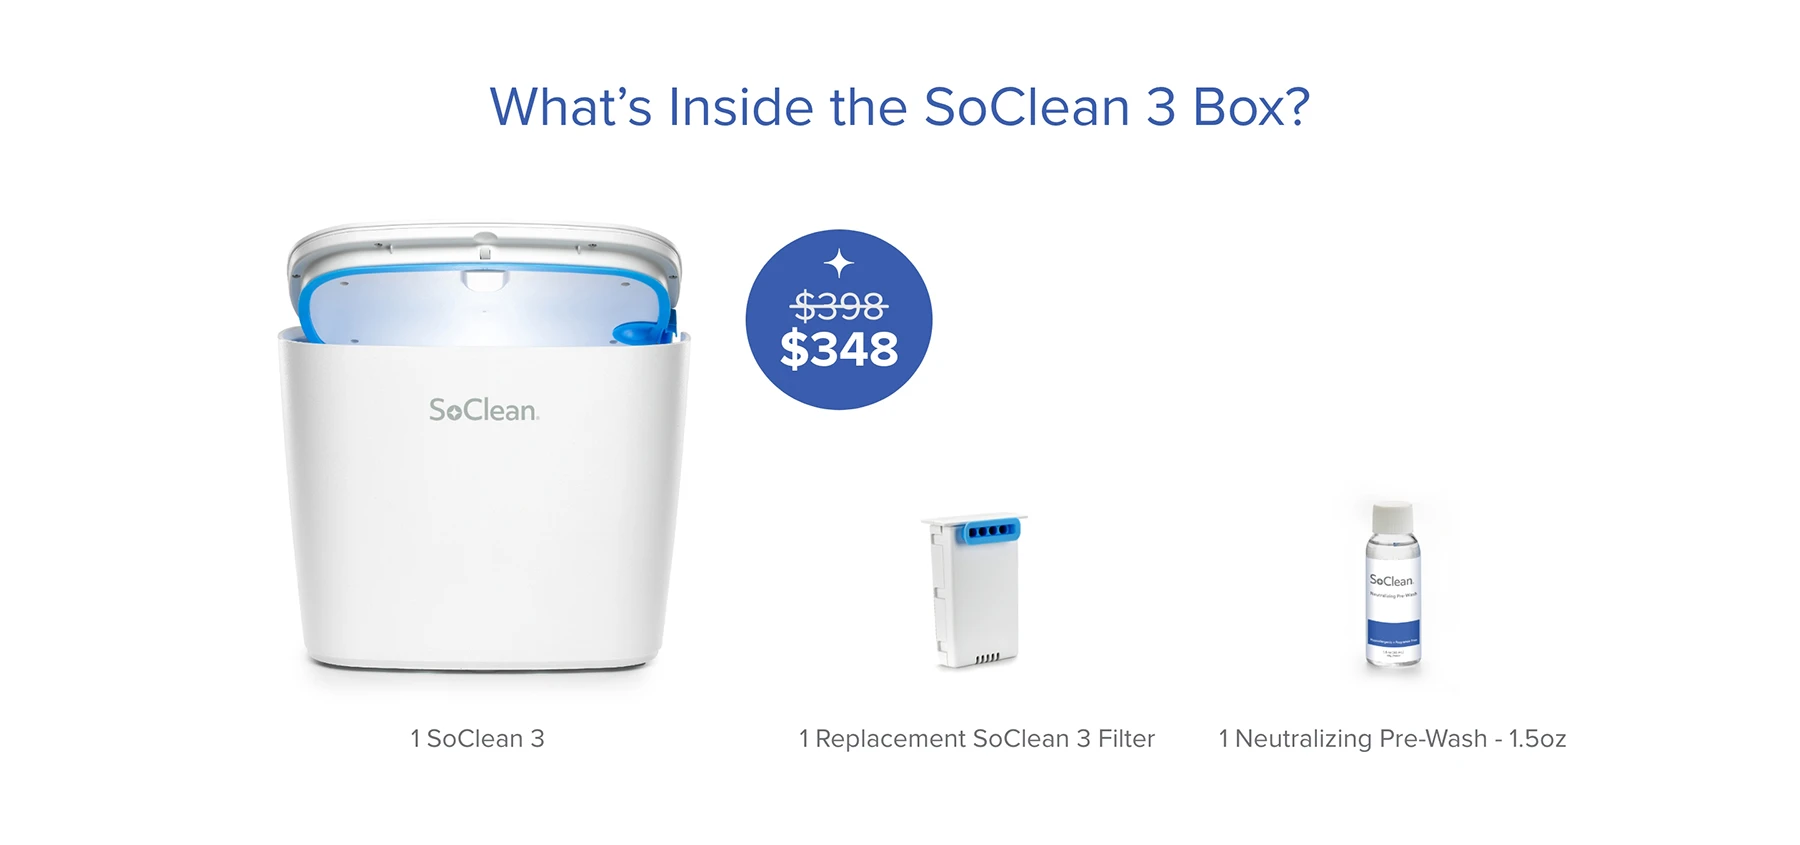 What is in the SoClean 3 Box?